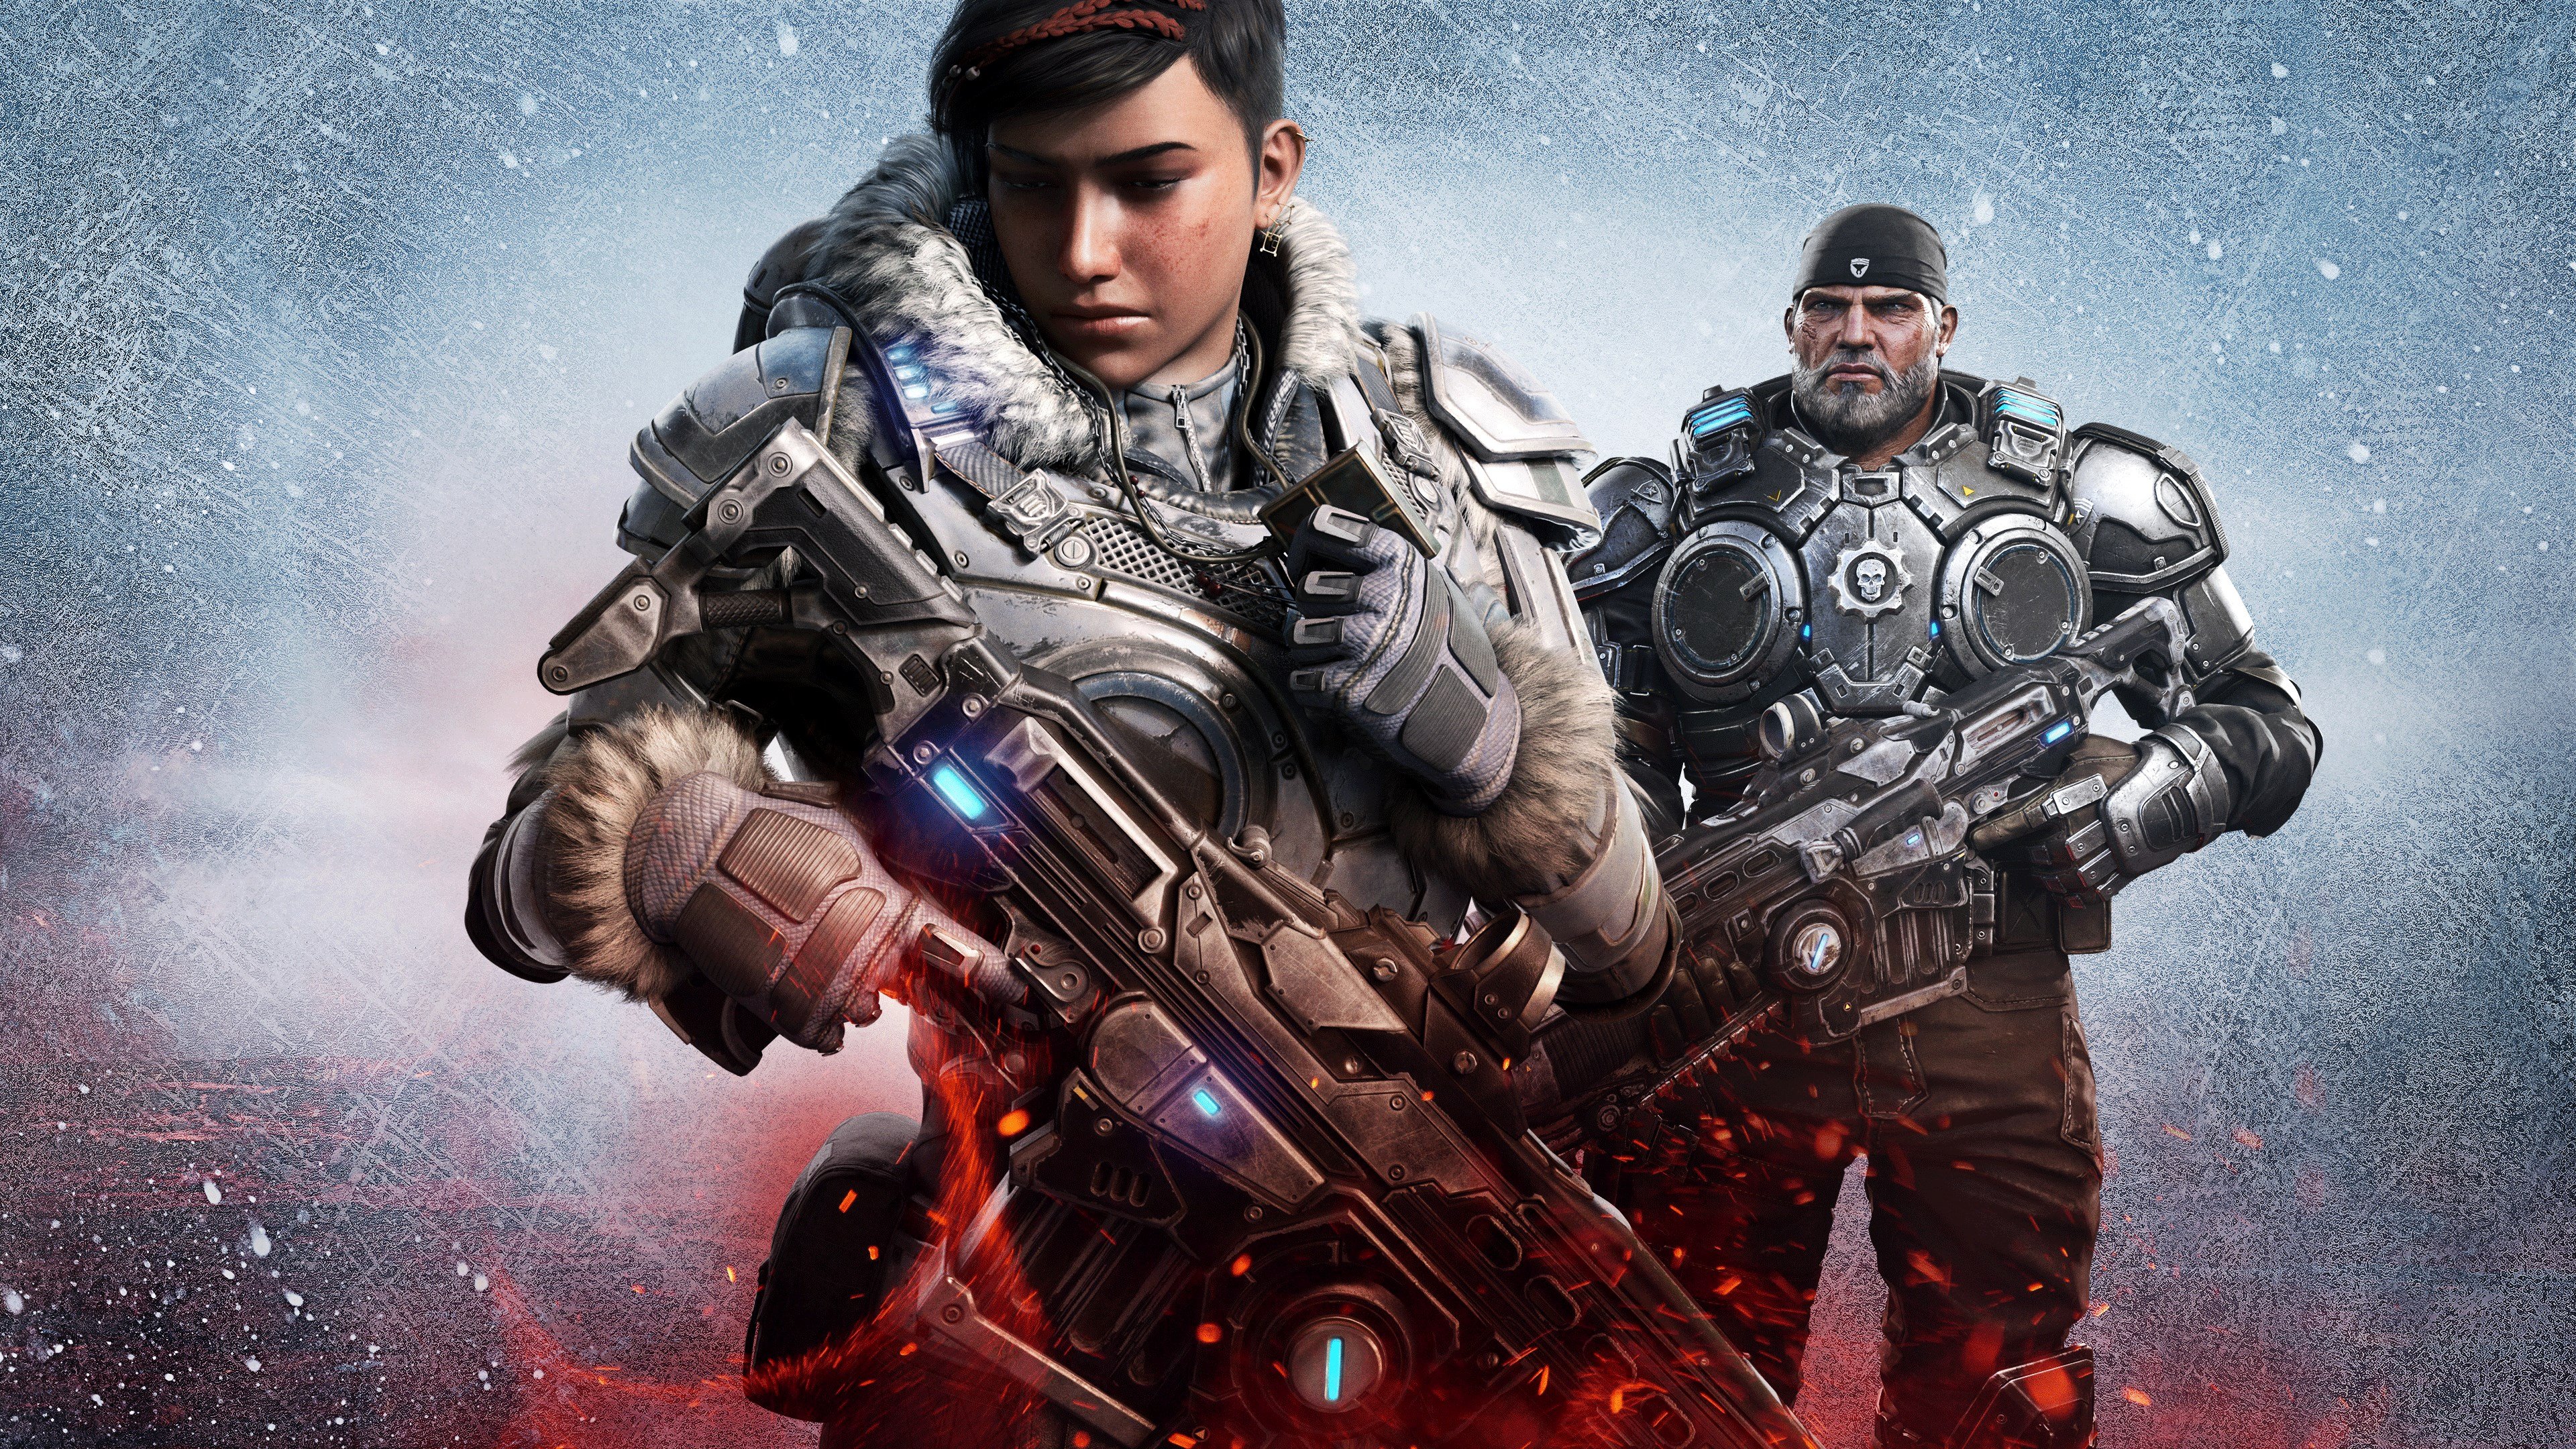 Gears 5 cover image